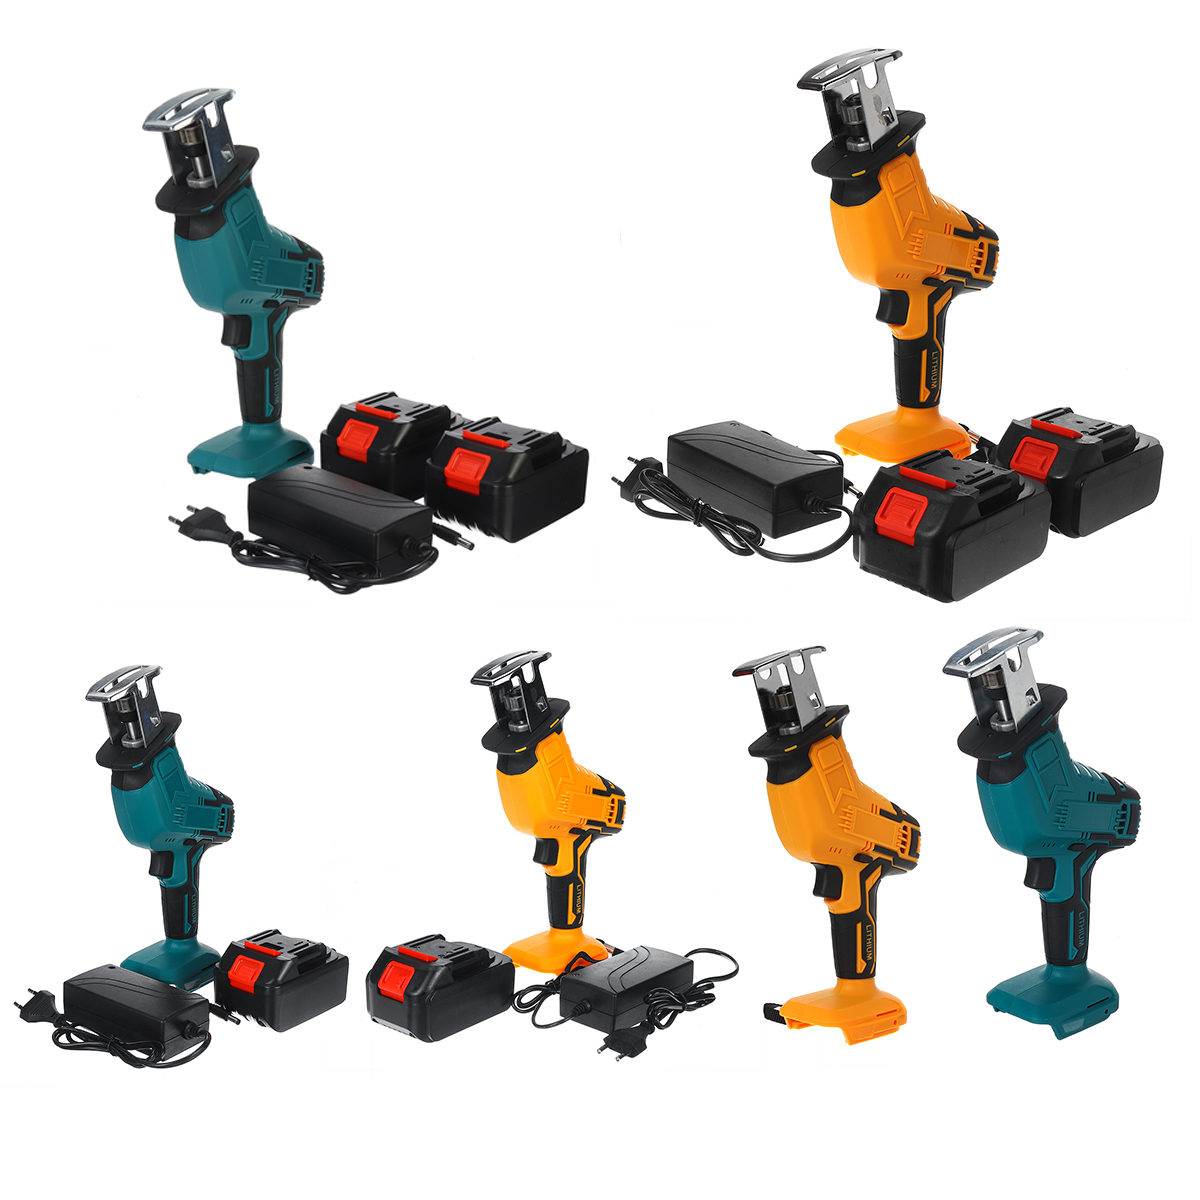 Rechargeable-Cordless-Reciprocating-Saw-Handheld-Woodorking-Wood-Cutter-W-None12-Battery--4PCS-Saw-B-1879912-10